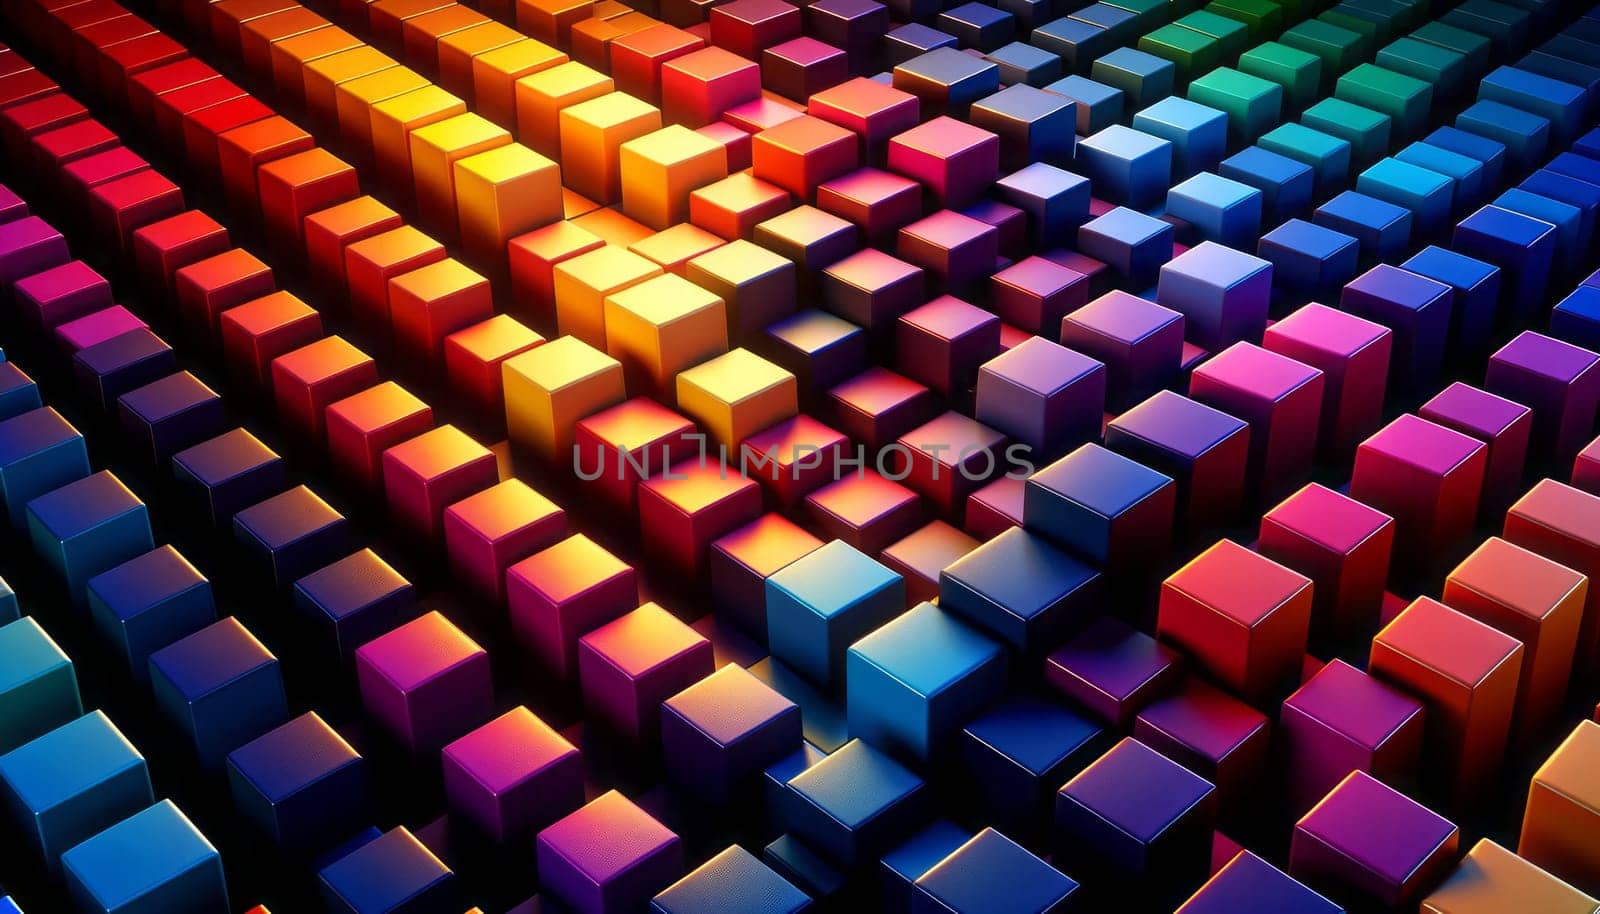 A wide digital illustration of a 3D geometric pattern consisting of cubes arranged in a diagonal grid. Each cube surface has a glossy finish, reflecting light and giving the pattern a shiny appearance. The cubes are colored in a gradient that transitions through the entire spectrum, from deep purples on one end to vibrant reds, oranges, yellows, greens, blues, and finally to dark indigo on the opposite end. The lighting is dramatic and enhances the 3D effect, casting subtle shadows between the cubes and highlighting the edges where the colors meet, emphasizing the transition between hues.